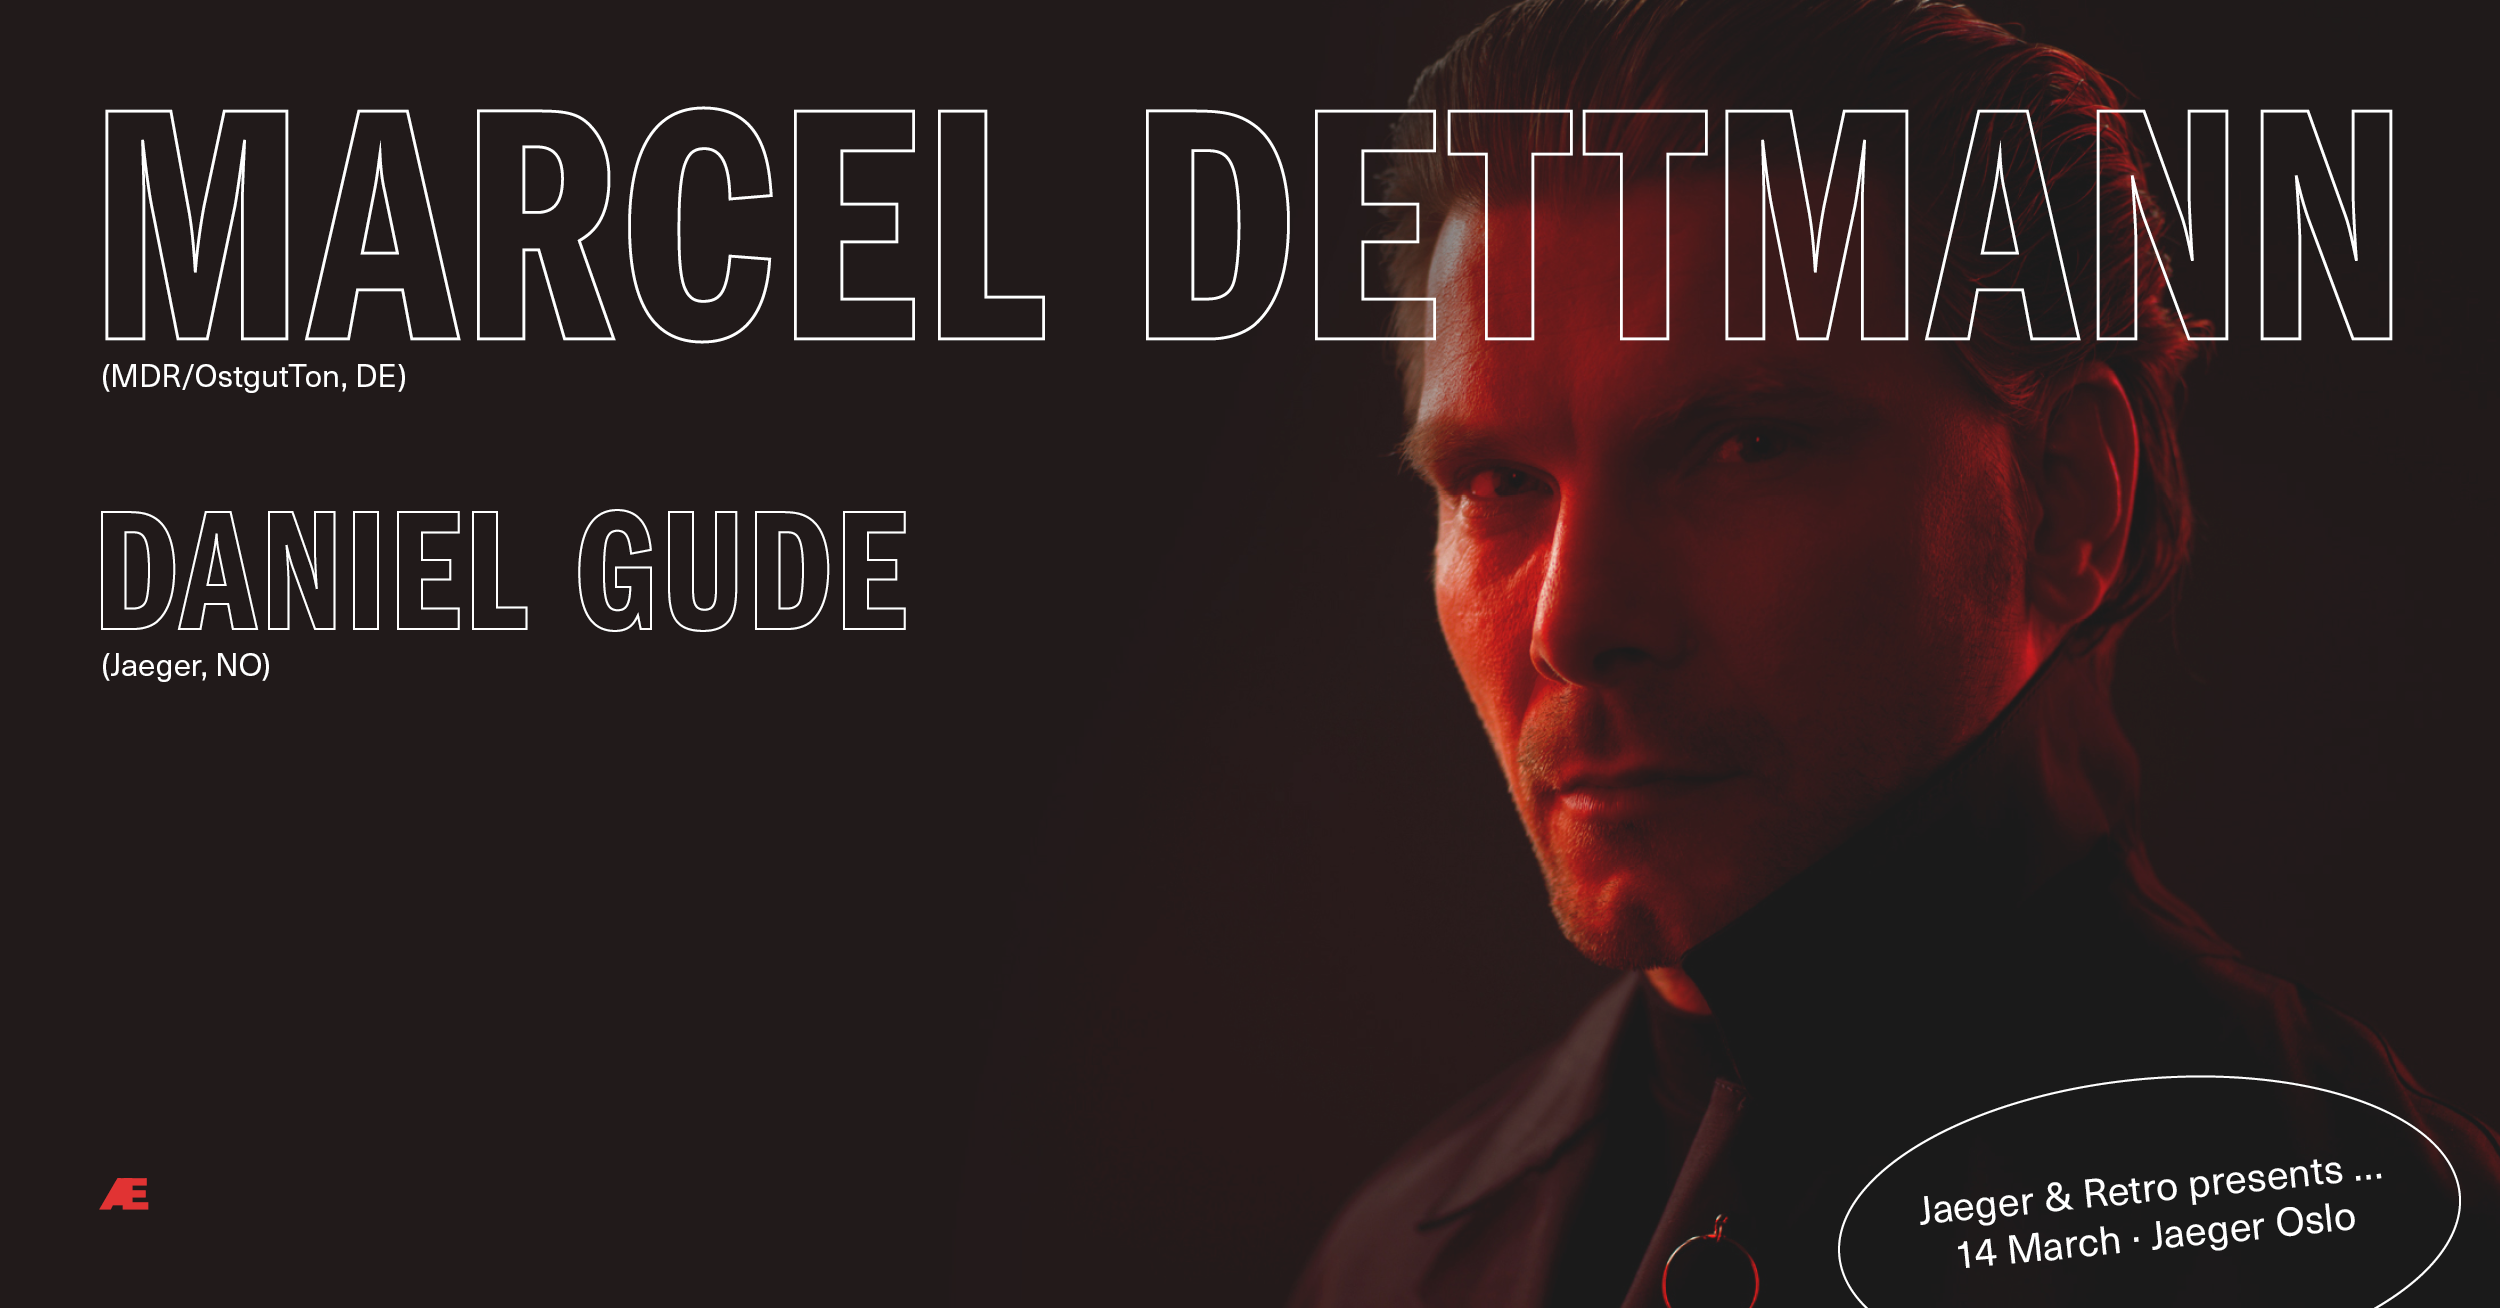 Tickets for Marcel Dettmann are now available